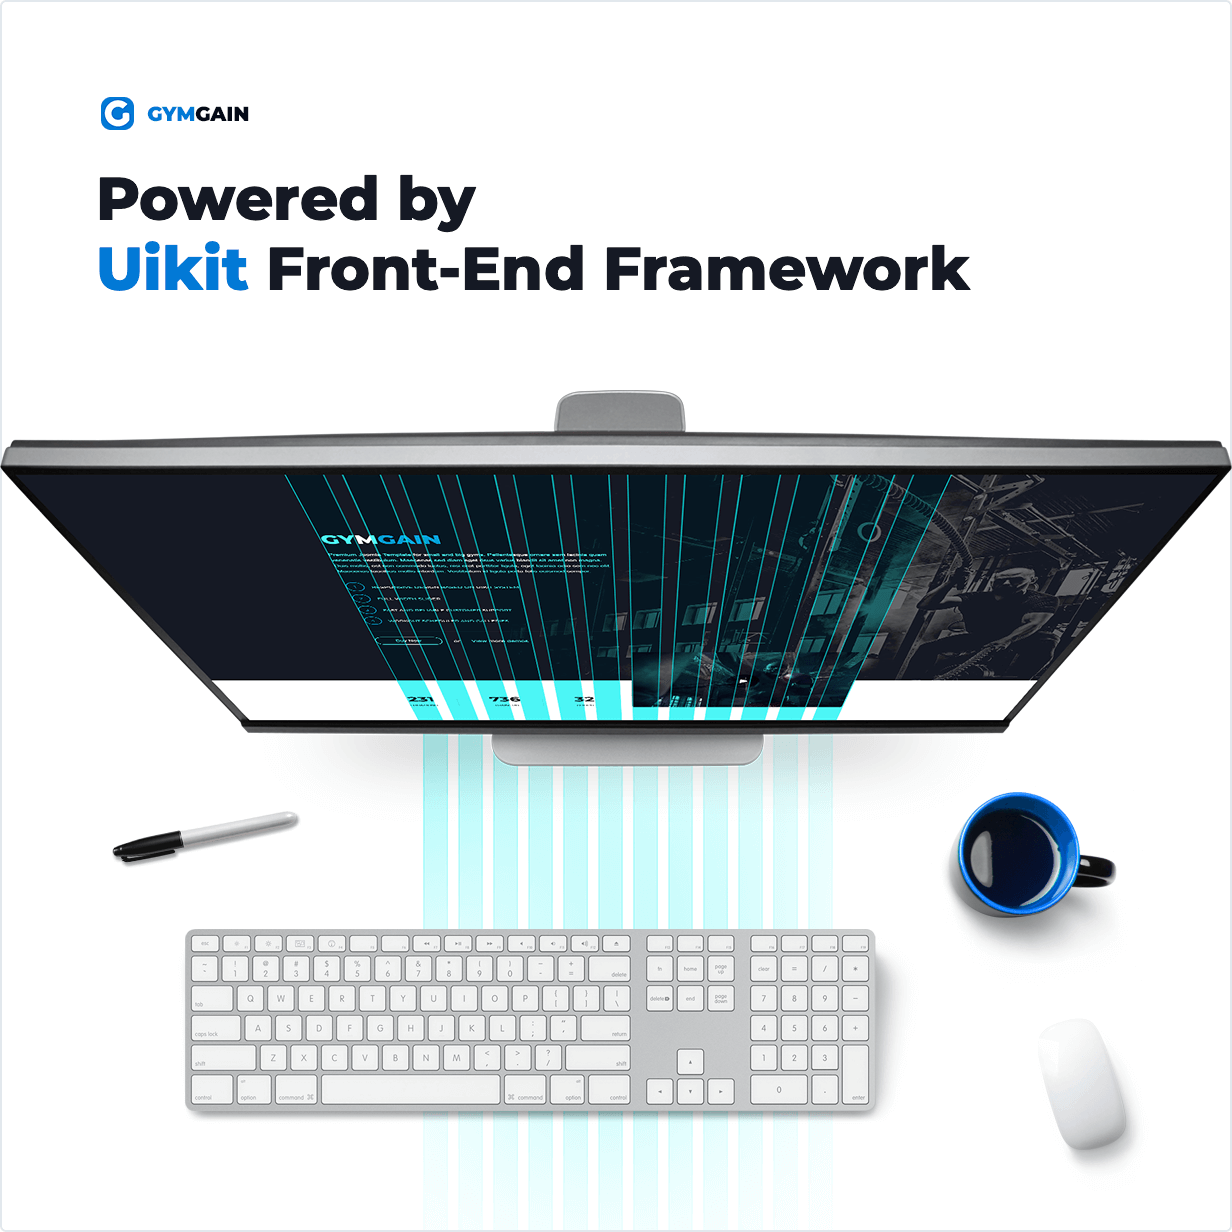 Powered by Uikit Front-End Framework